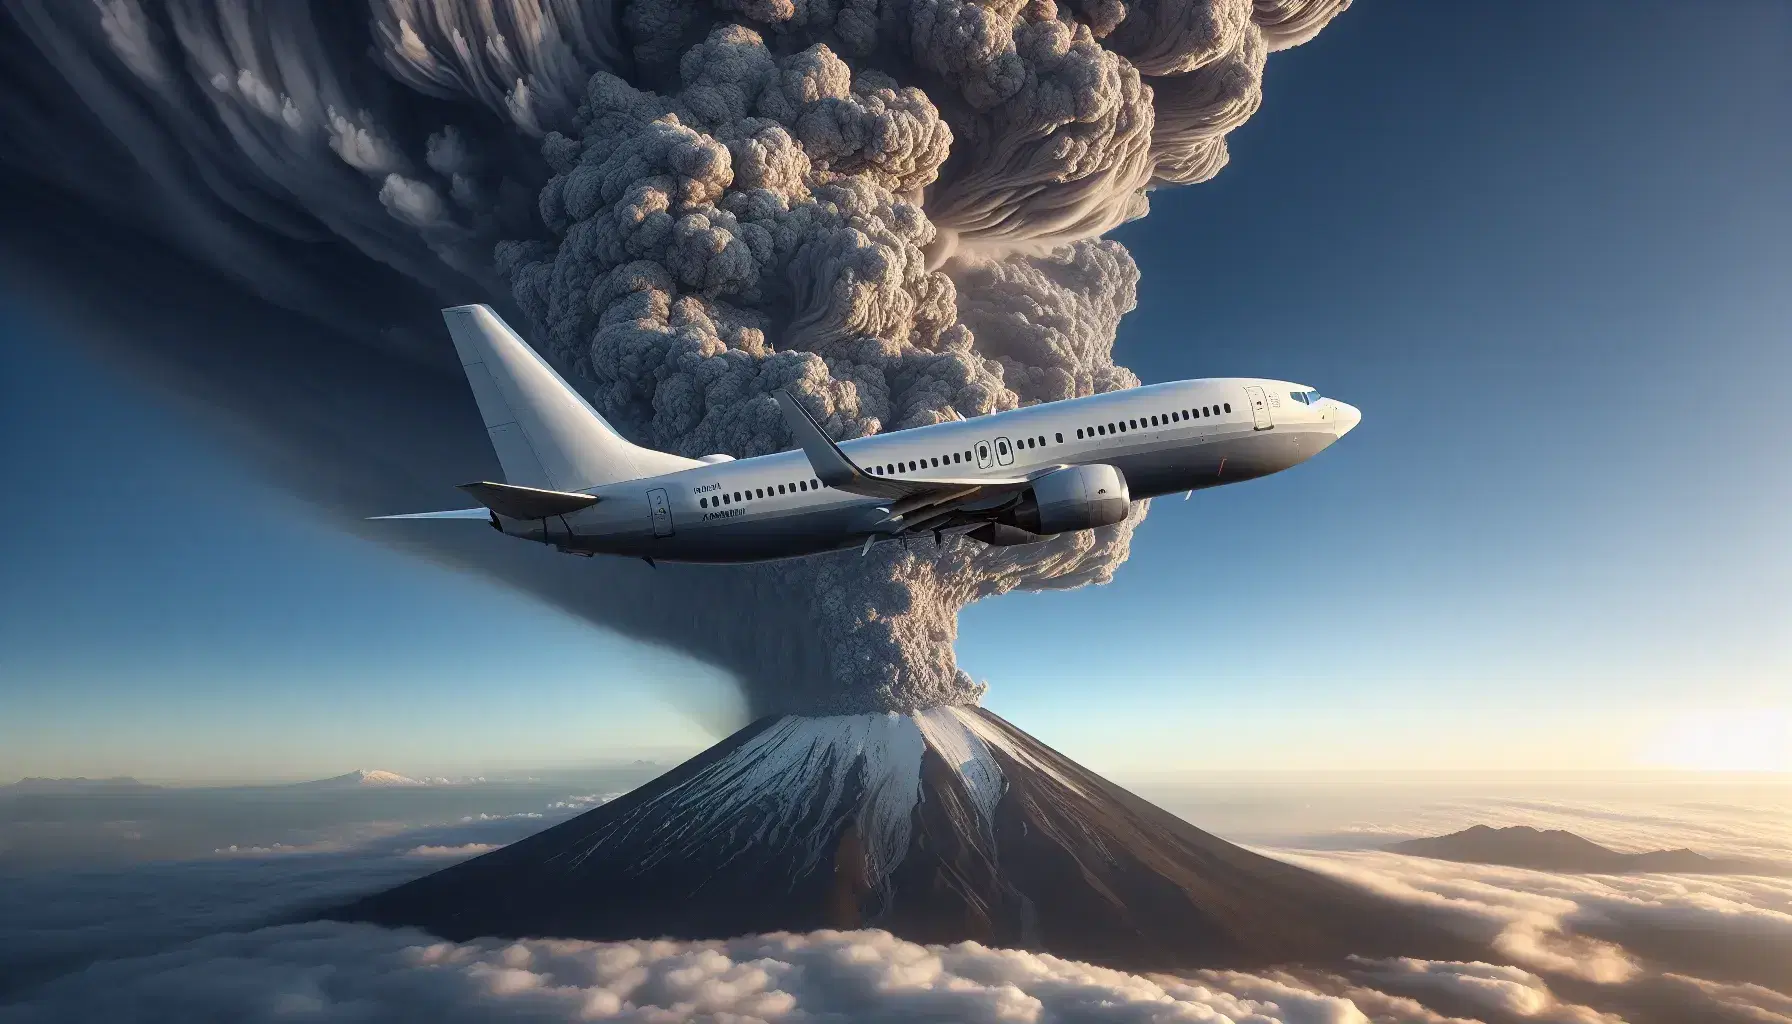 Airliner in flight with clear sky fading from light to dark blue, above an erupting volcano with a dense cloud of gray ash.